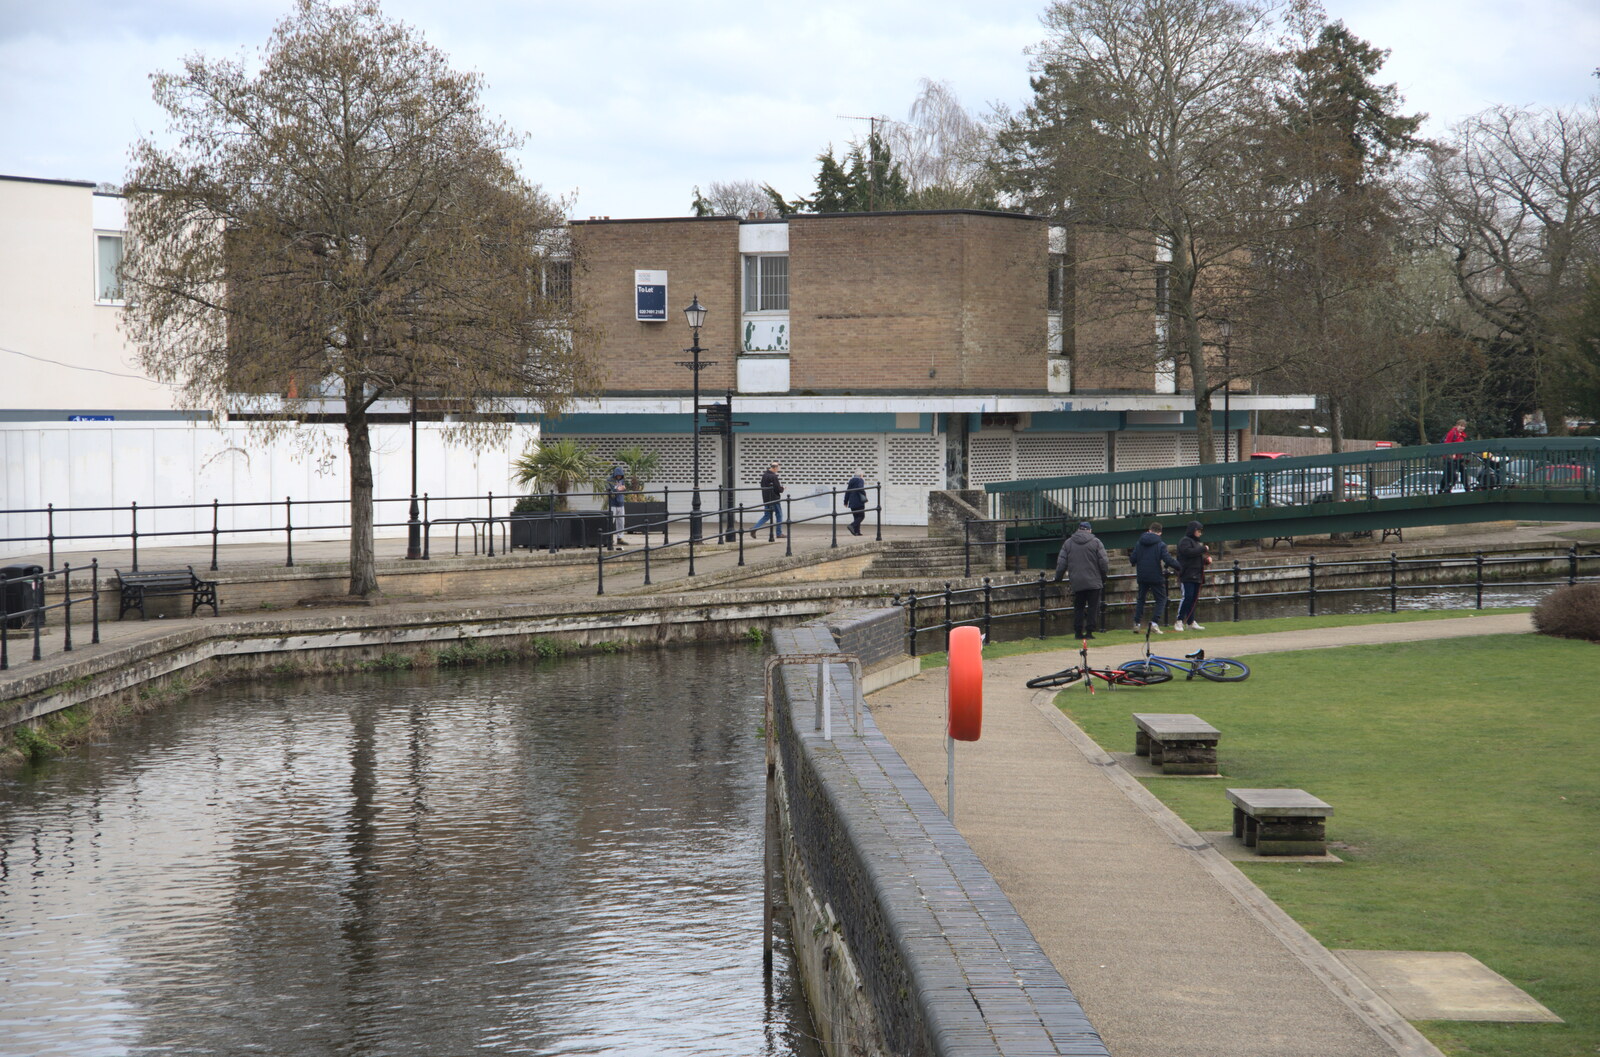 1960s buildings on Riverside Walk from A Postcard from Thetford, Norfolk - 15th March 2023